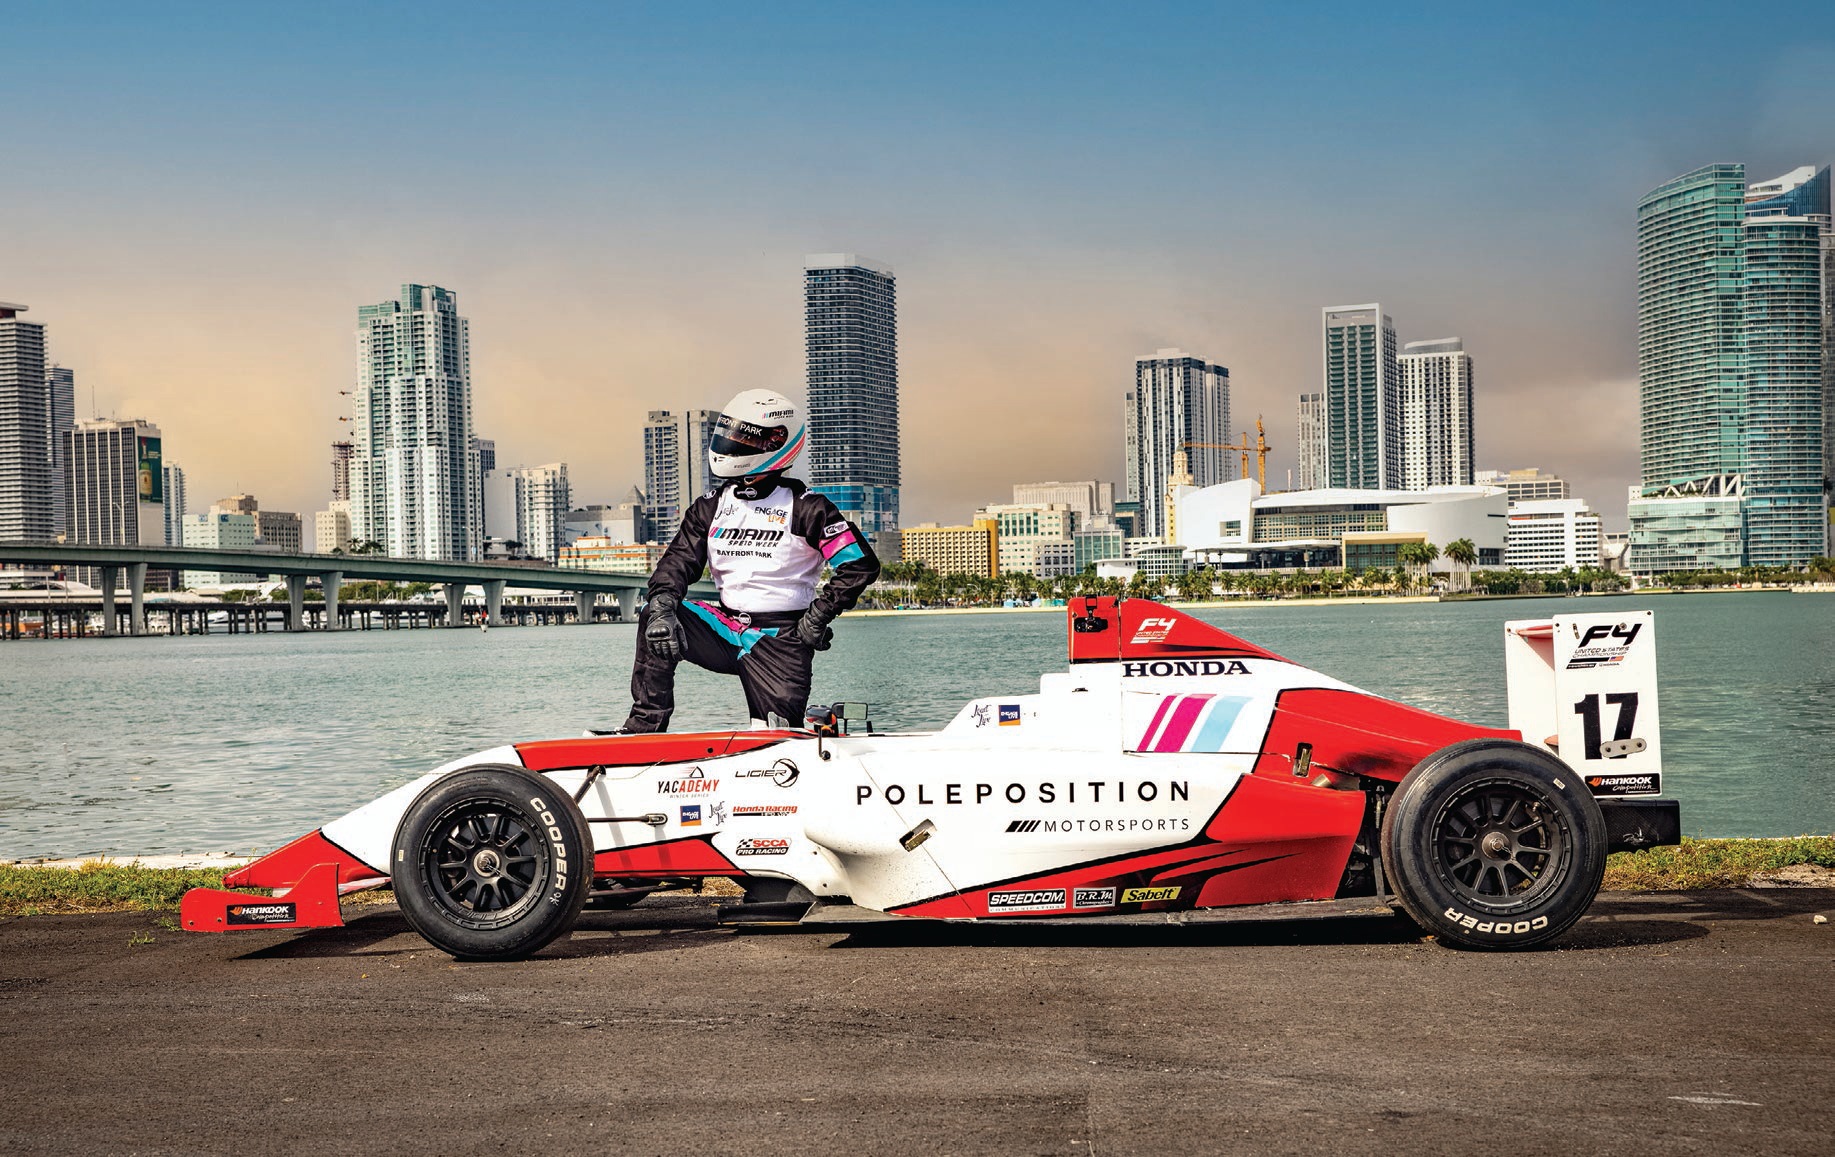 Discover The Best Of Miamis Formula One Events